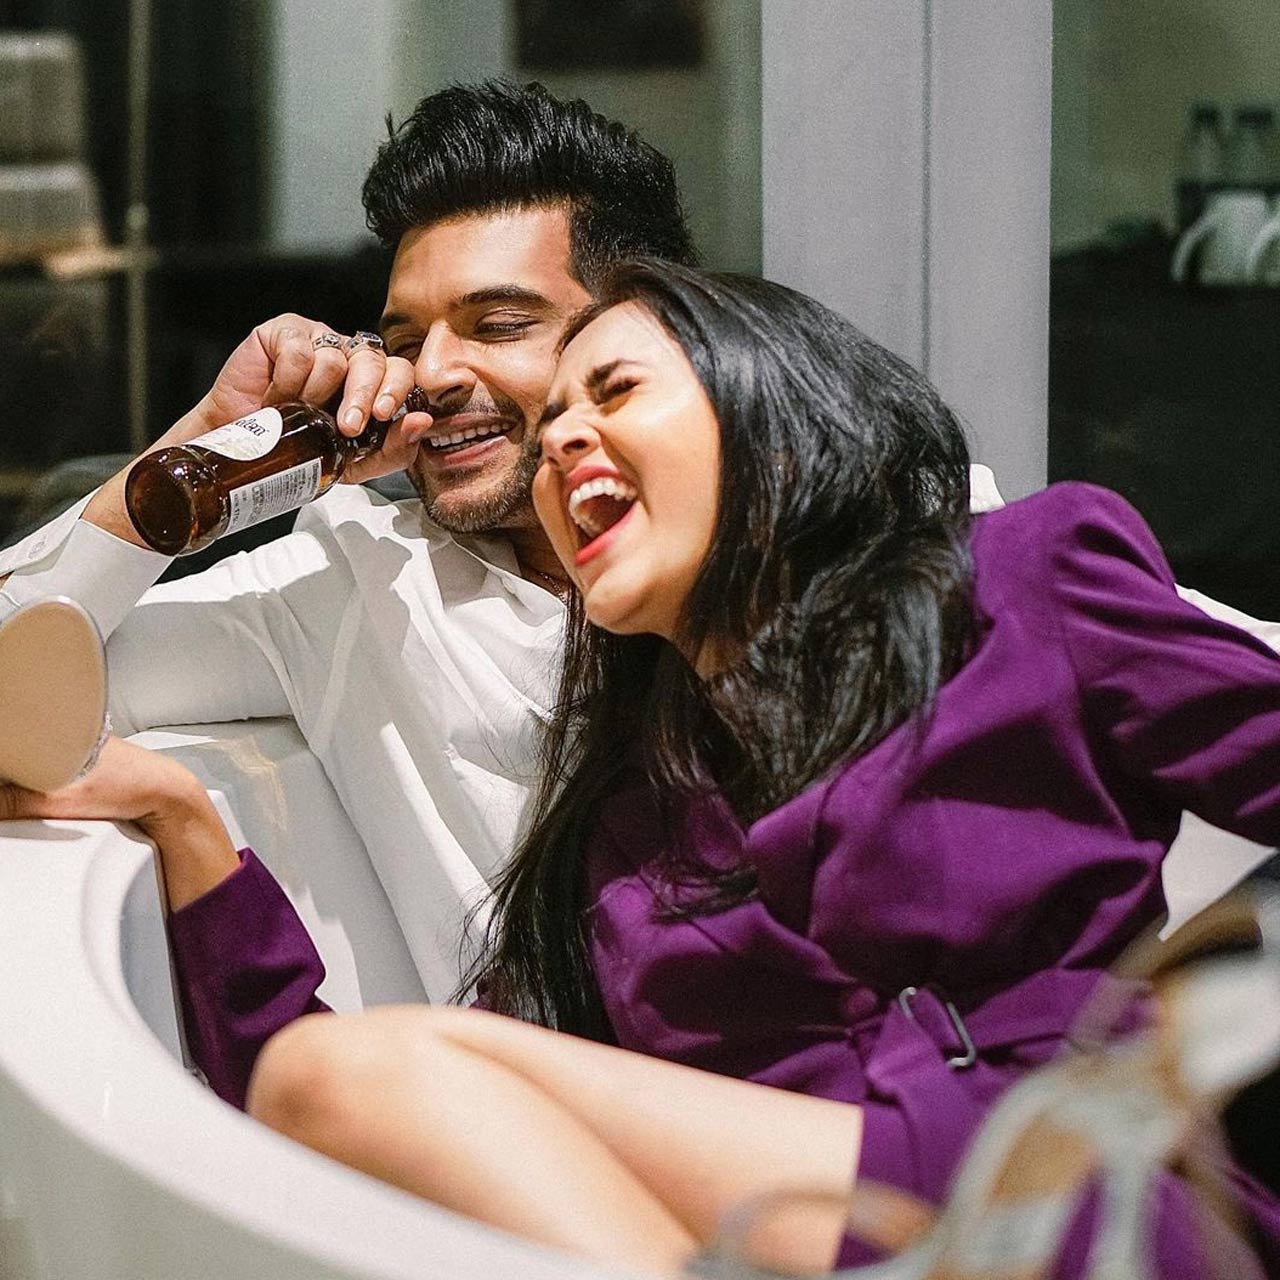 Karan Kundrra and Tejasswi Prakash have been together since Bigg Boss 15 and fans always go berserk seeing their pictures together. How many of these moments of the couple have you seen? Here, the couple shares some hearty laughs